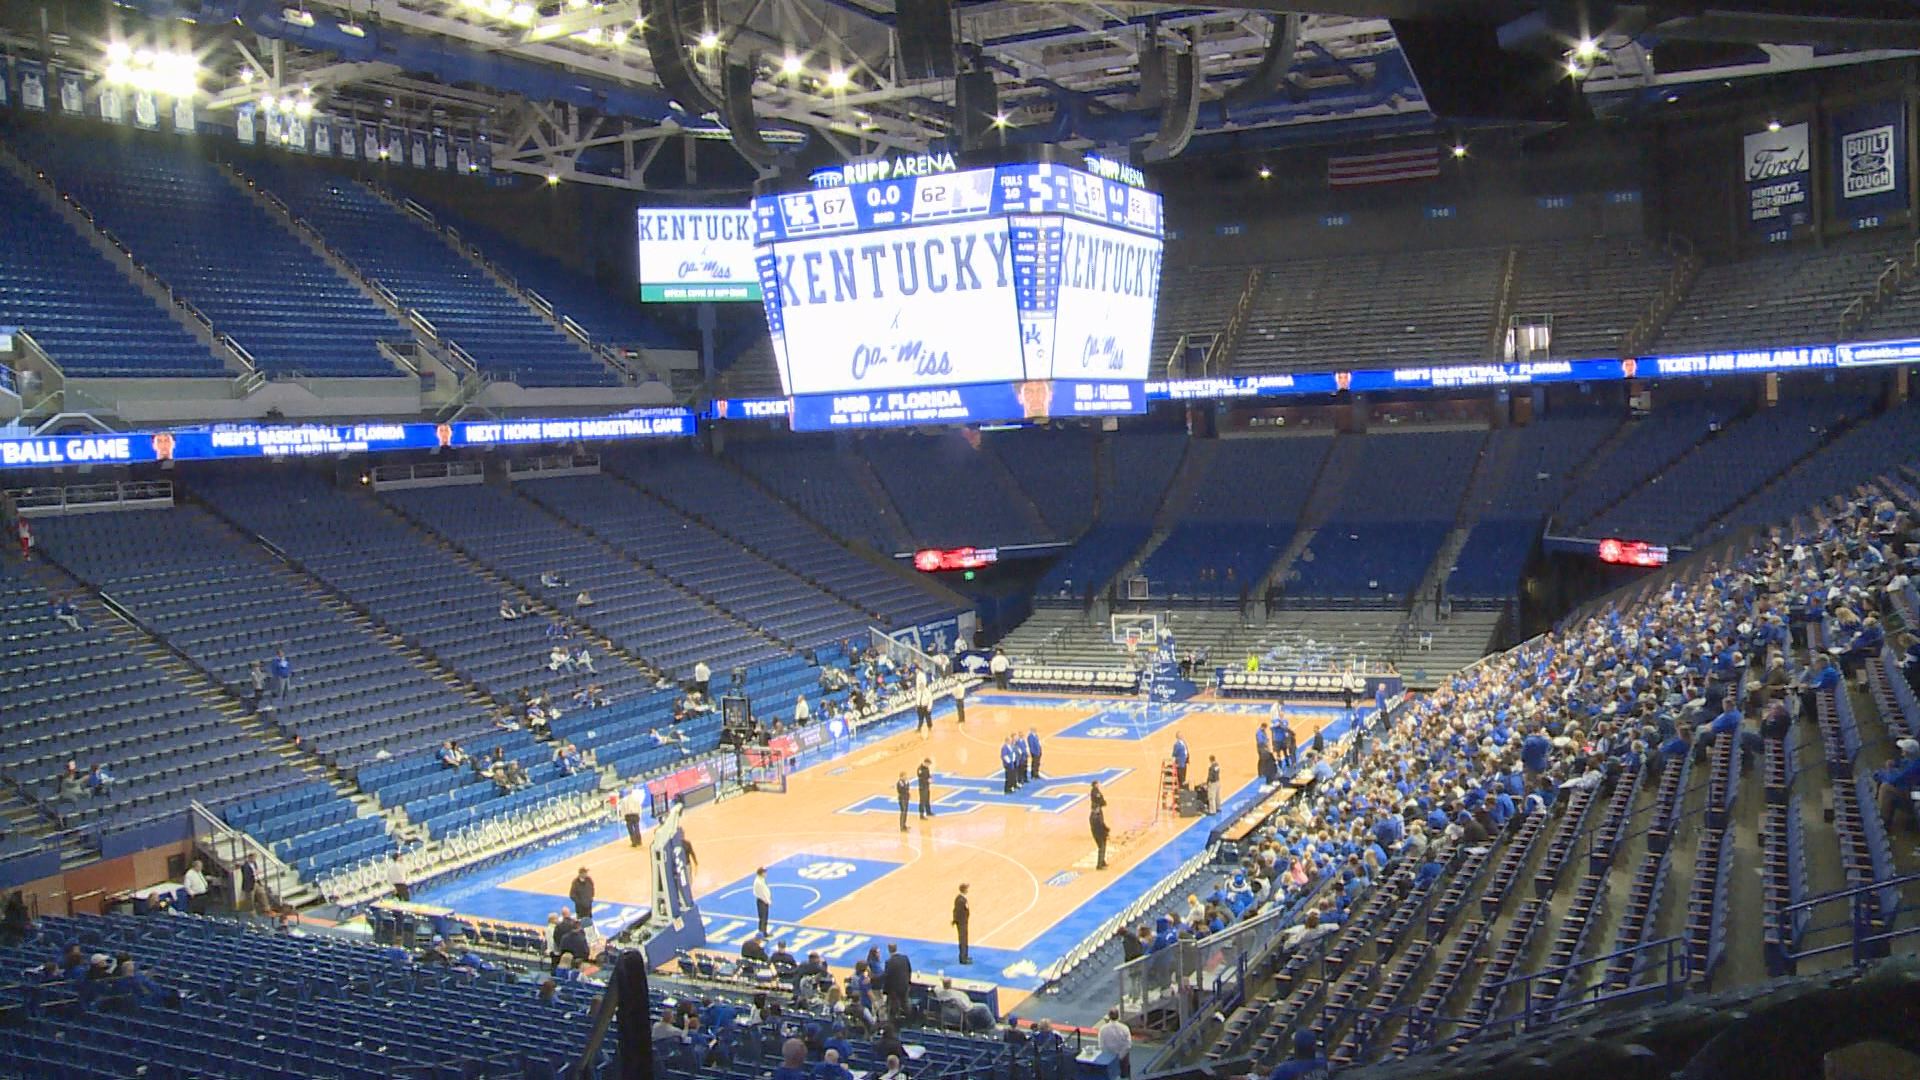 Rupp Arena Seating Chart With Rows Two Birds Home